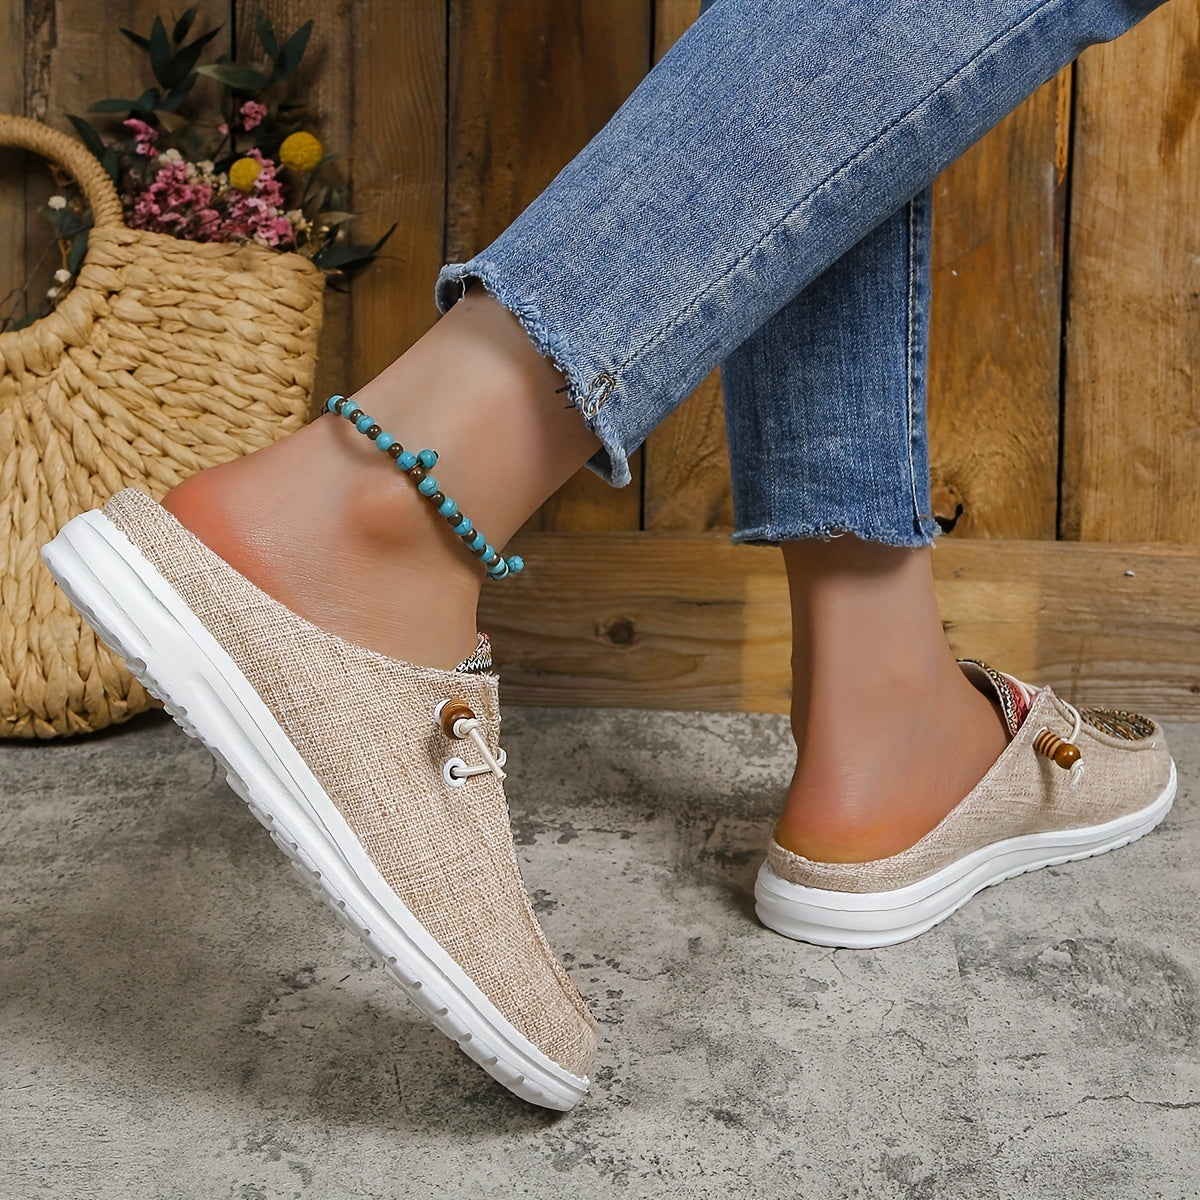 Ethnic Style Canvas Shoes, Lightweight Lace Up Sneakers